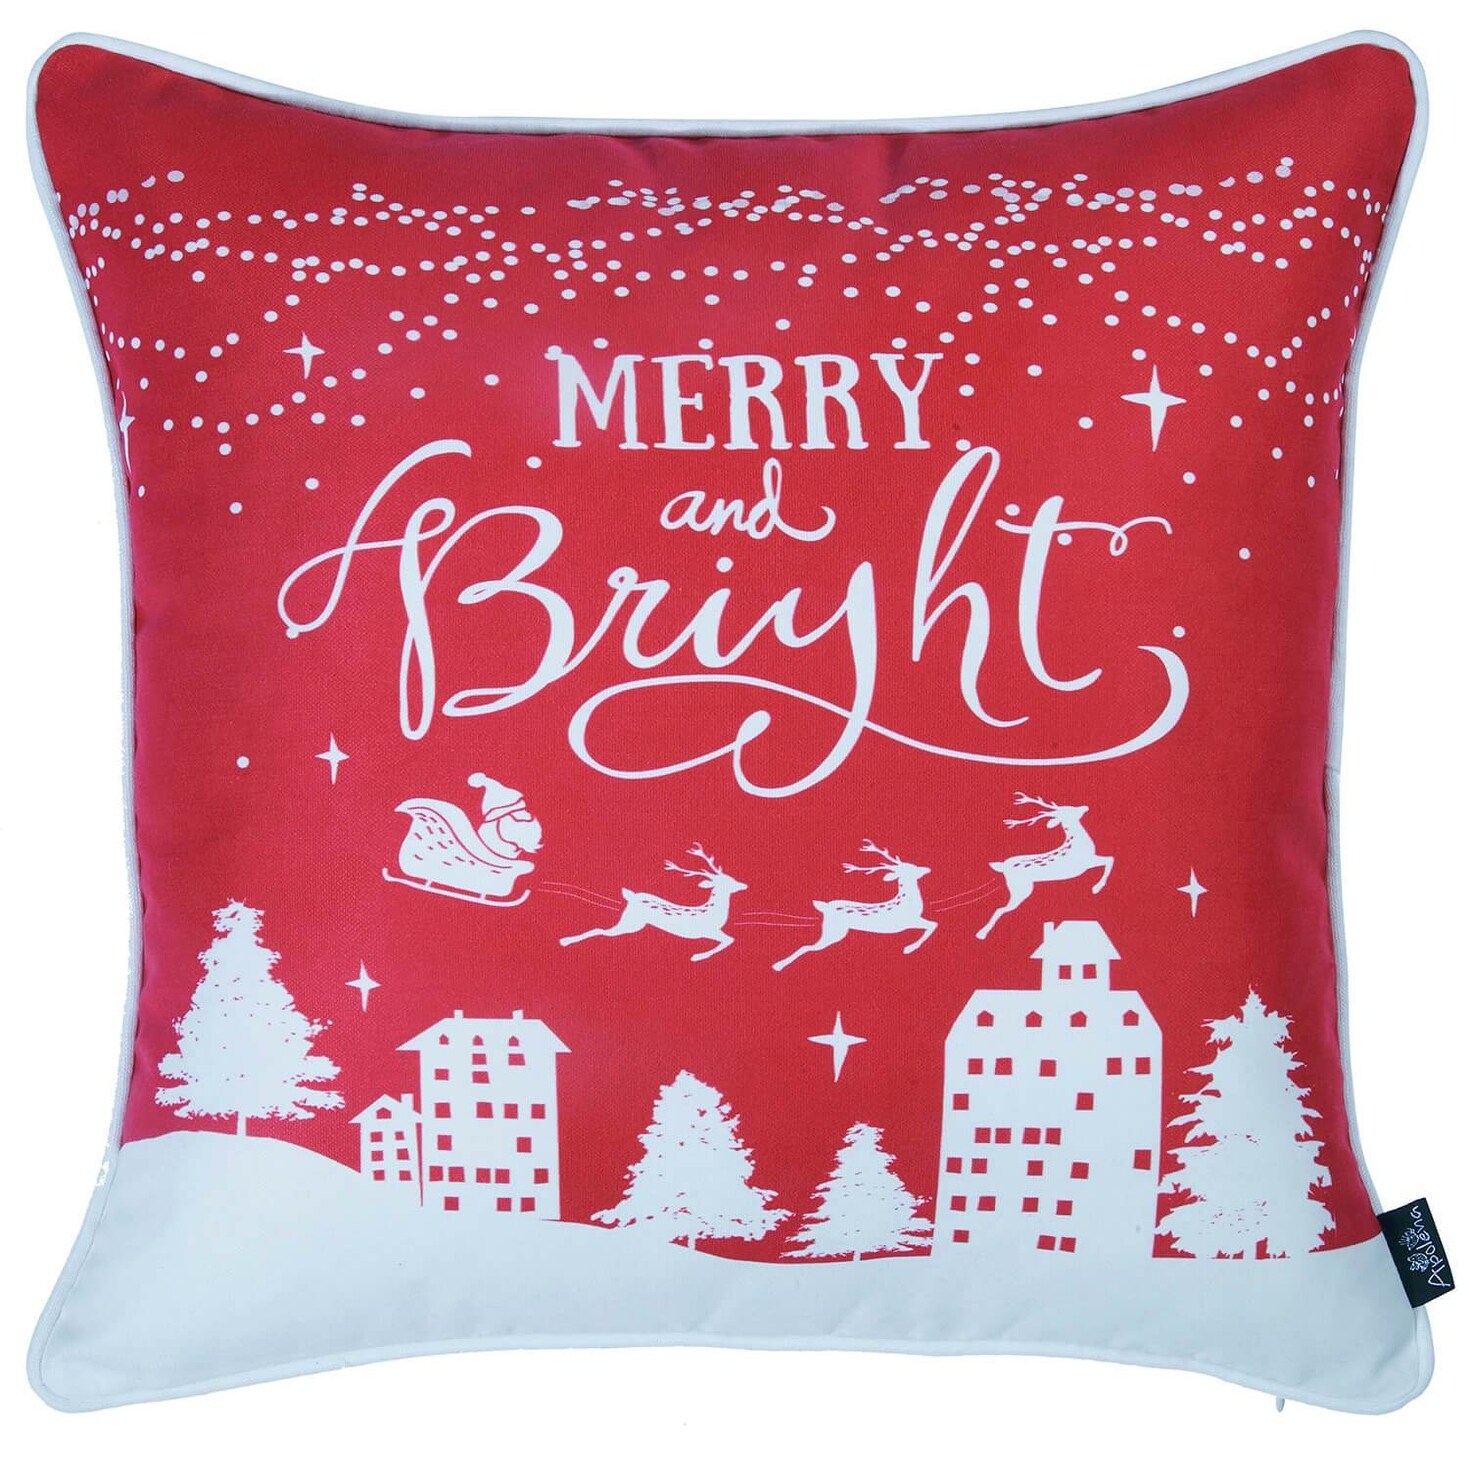 https://ak1.ostkcdn.com/images/products/is/images/direct/6c4ca1d532c8588e685487c86f9361e6695fca59/Merry-Christmas-Set-of-4-Throw-Pillow-Covers-Christmas-Gift-18%22x18%22.jpg